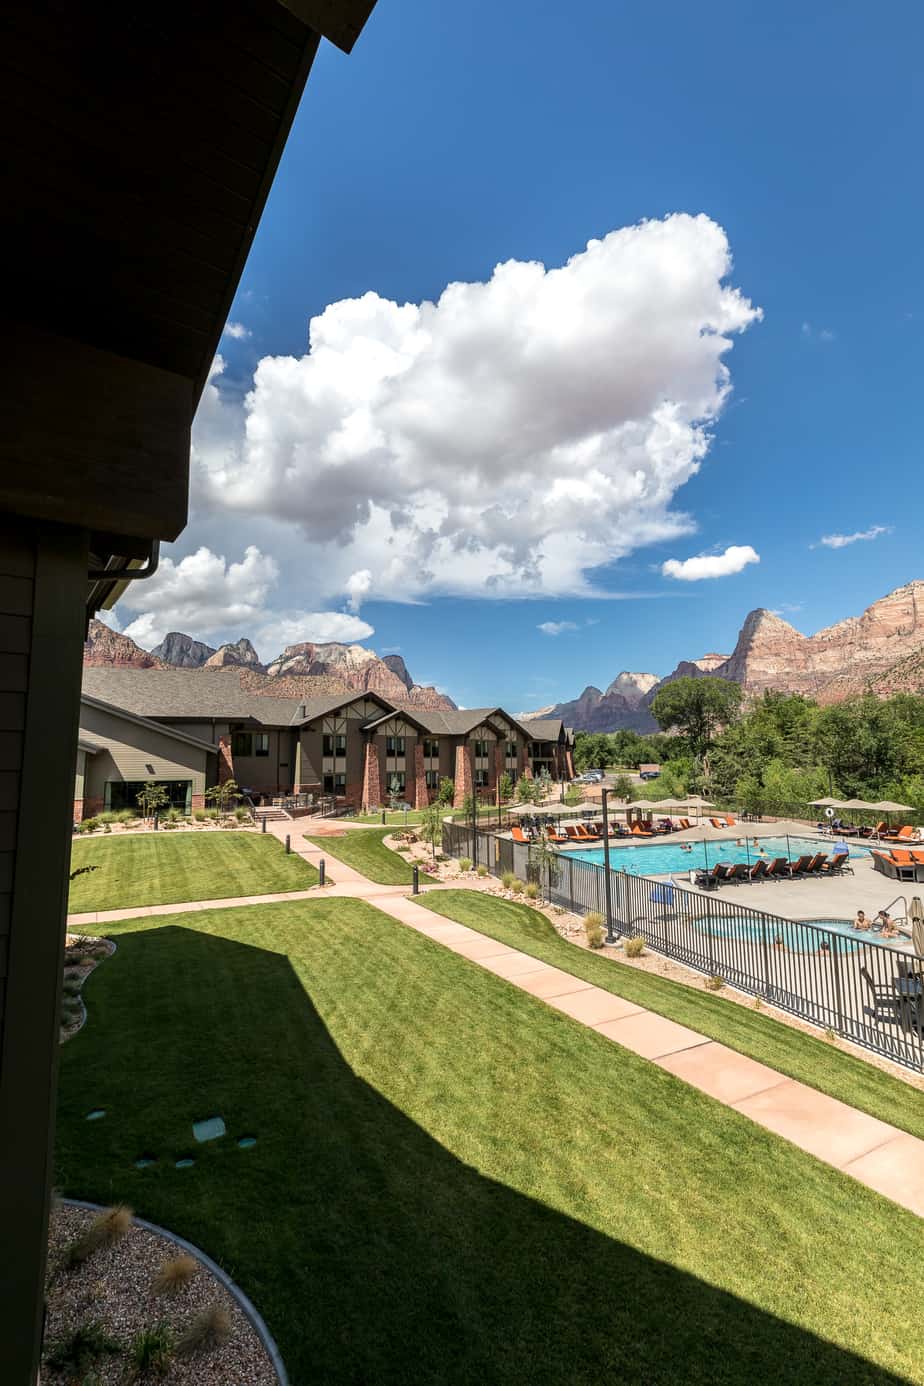 Best Place to Stay for Zion National Park